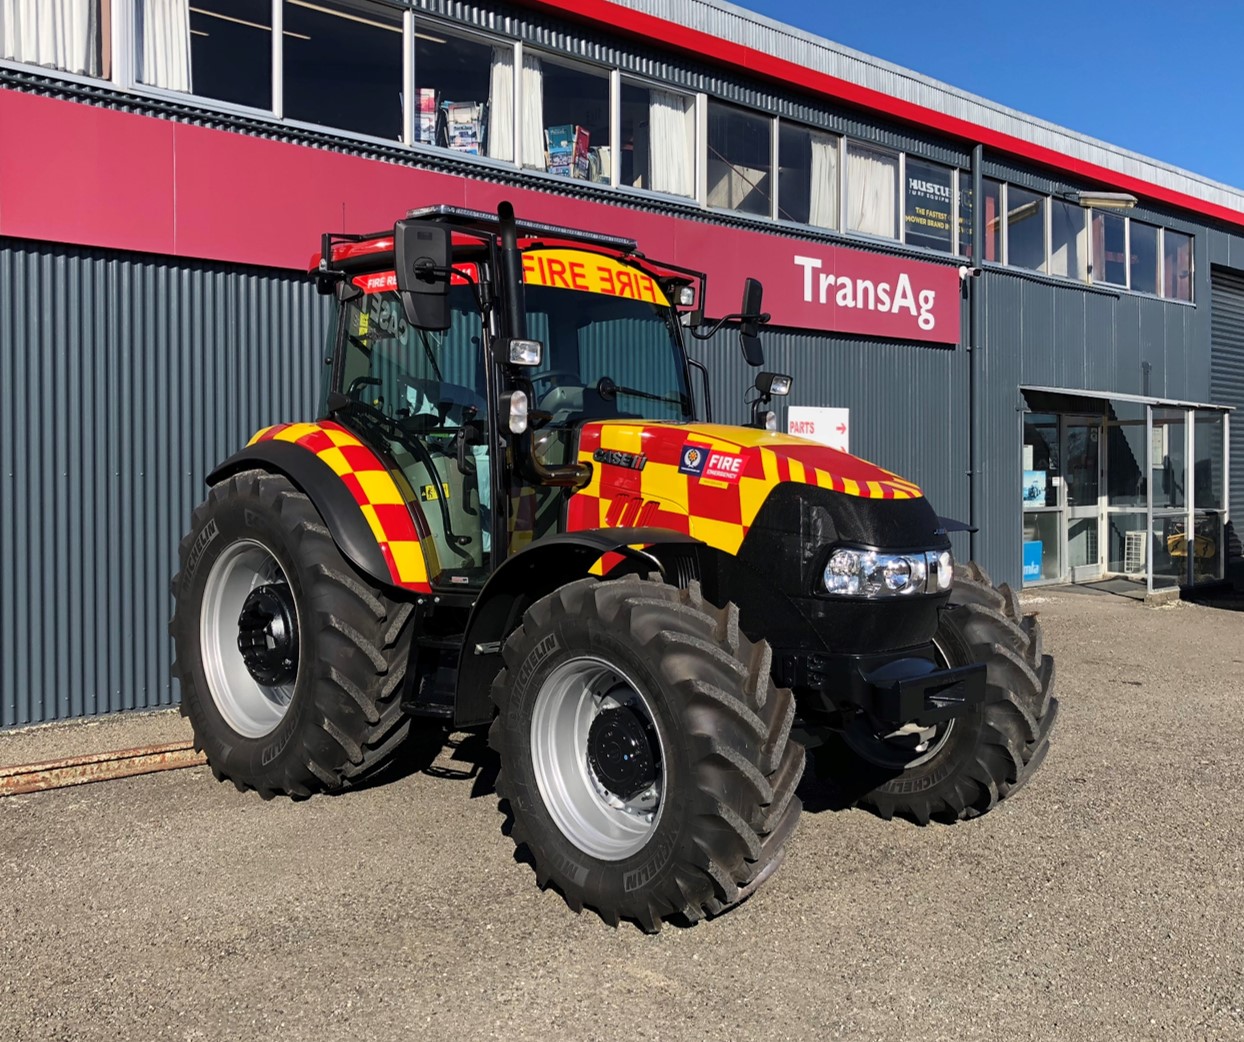 Fire and Emergency branded tractor